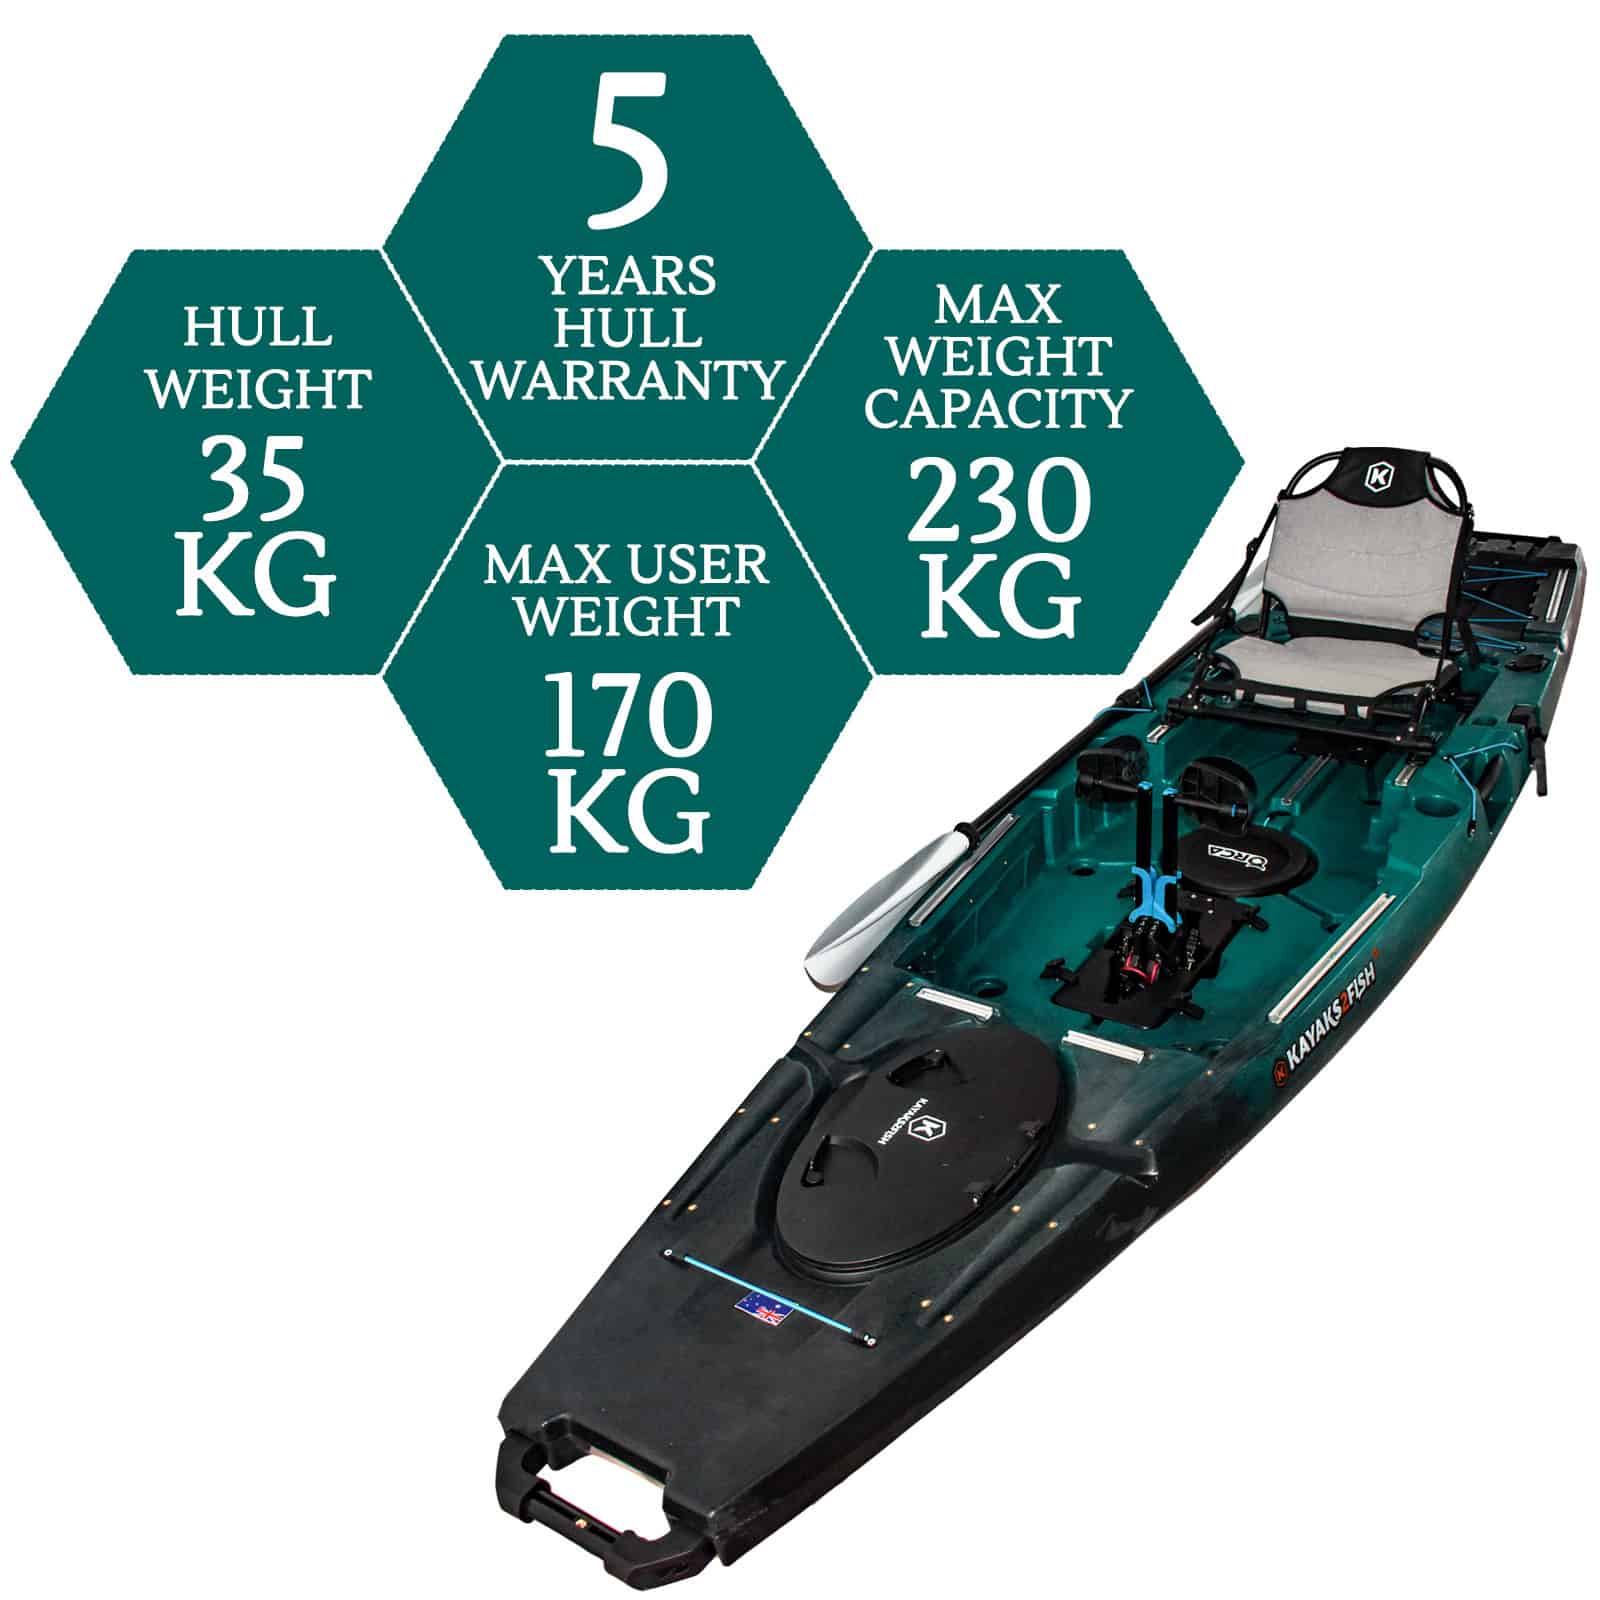 NGS-12-EMERALDGREEN-MAX specifications